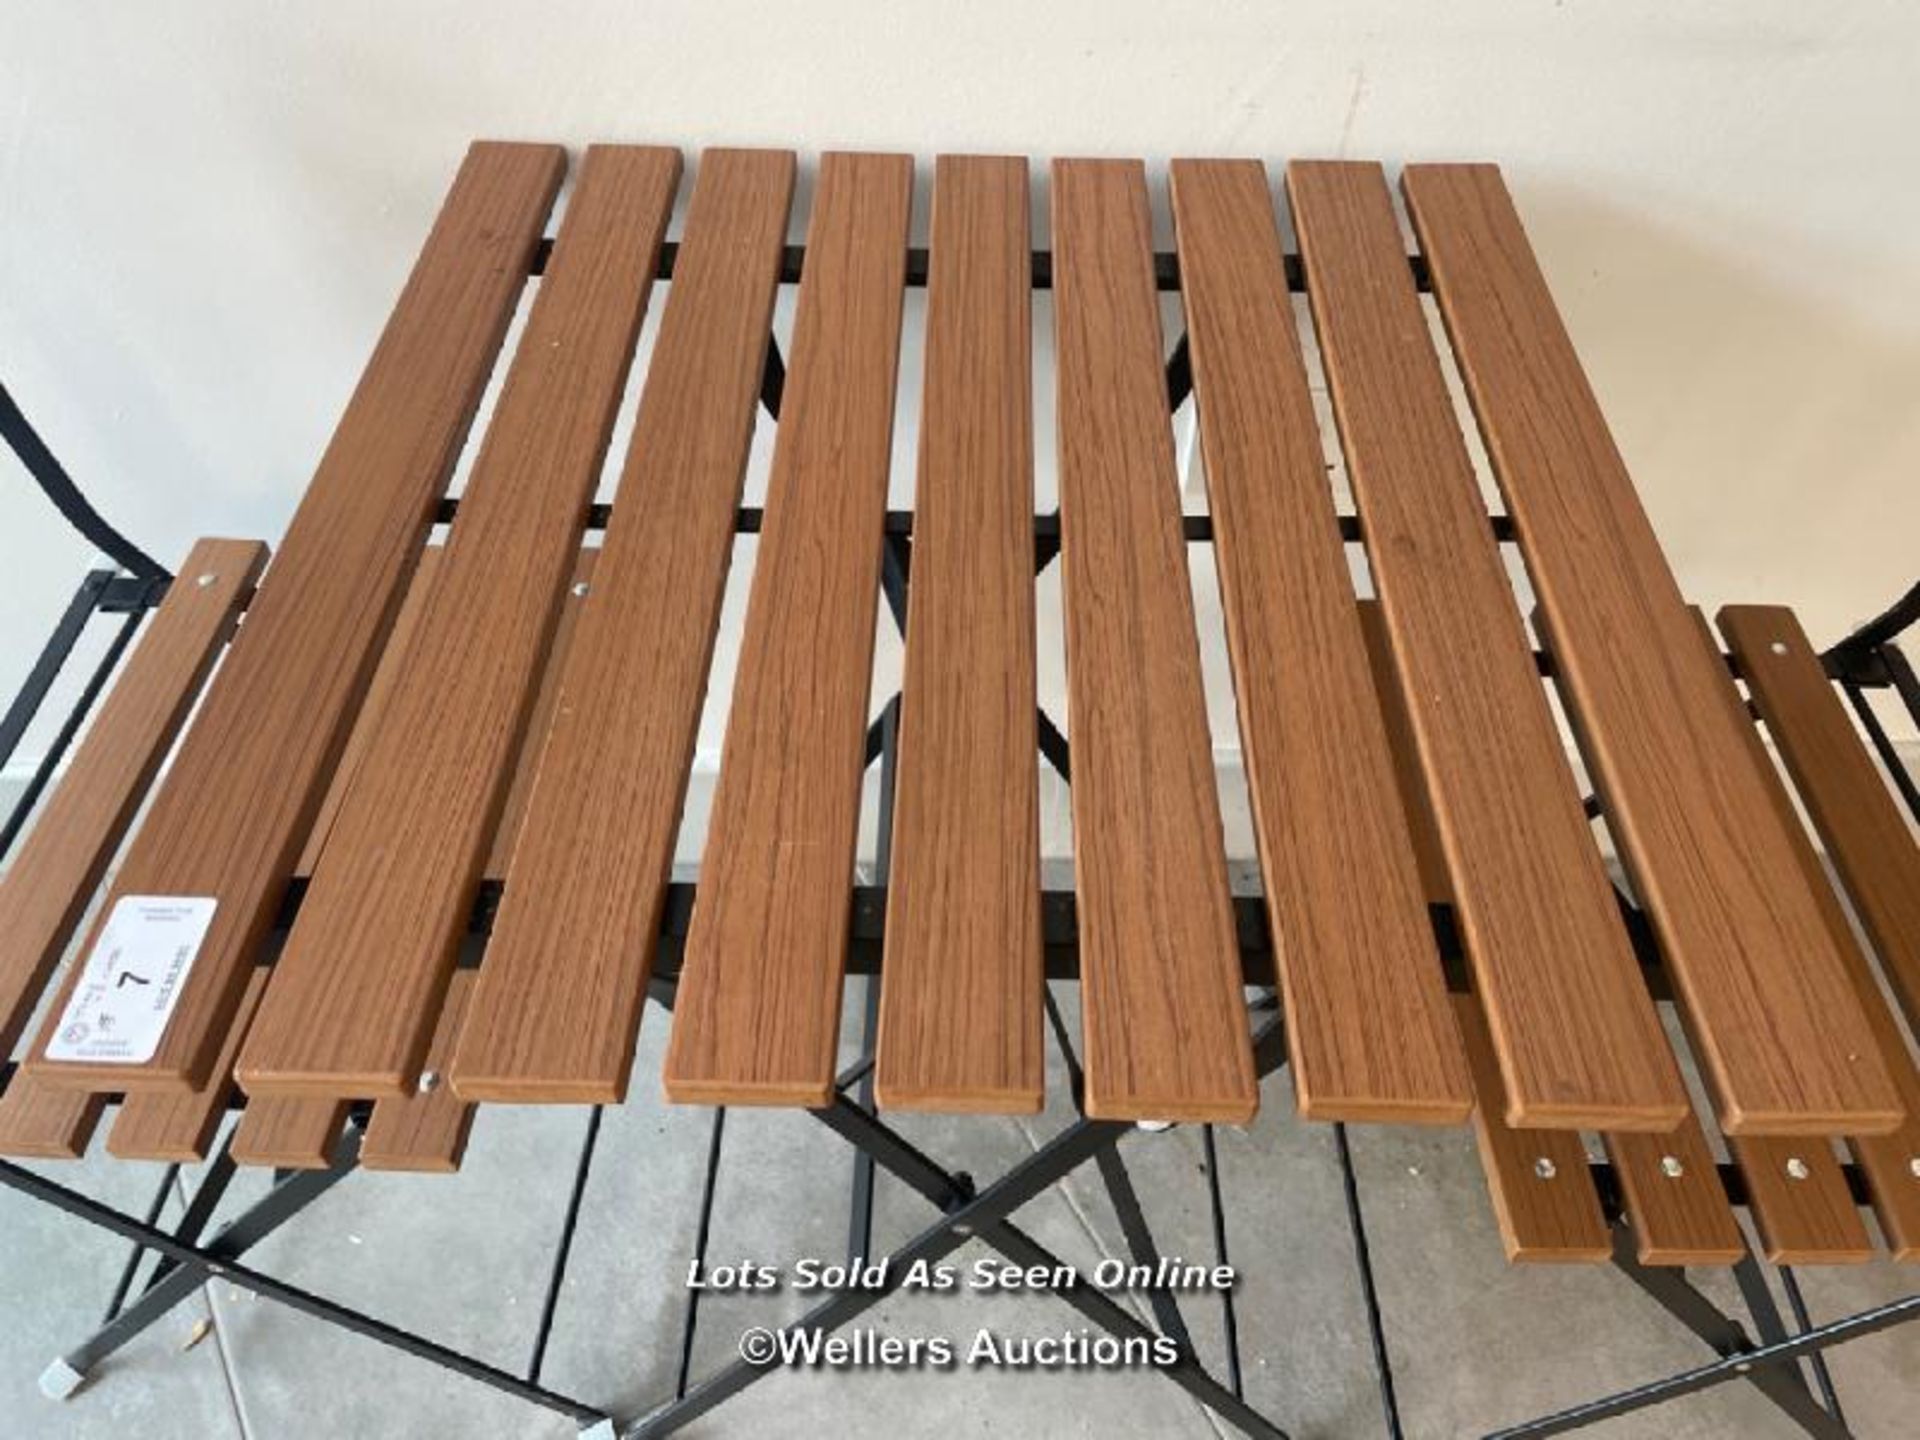 FOLDING TABLE AND CHAIRS SET (ONE TABLE AND TWO CHAIRS) - TABLE 71CM H X 60CM W X 60CM D / THE - Image 2 of 4